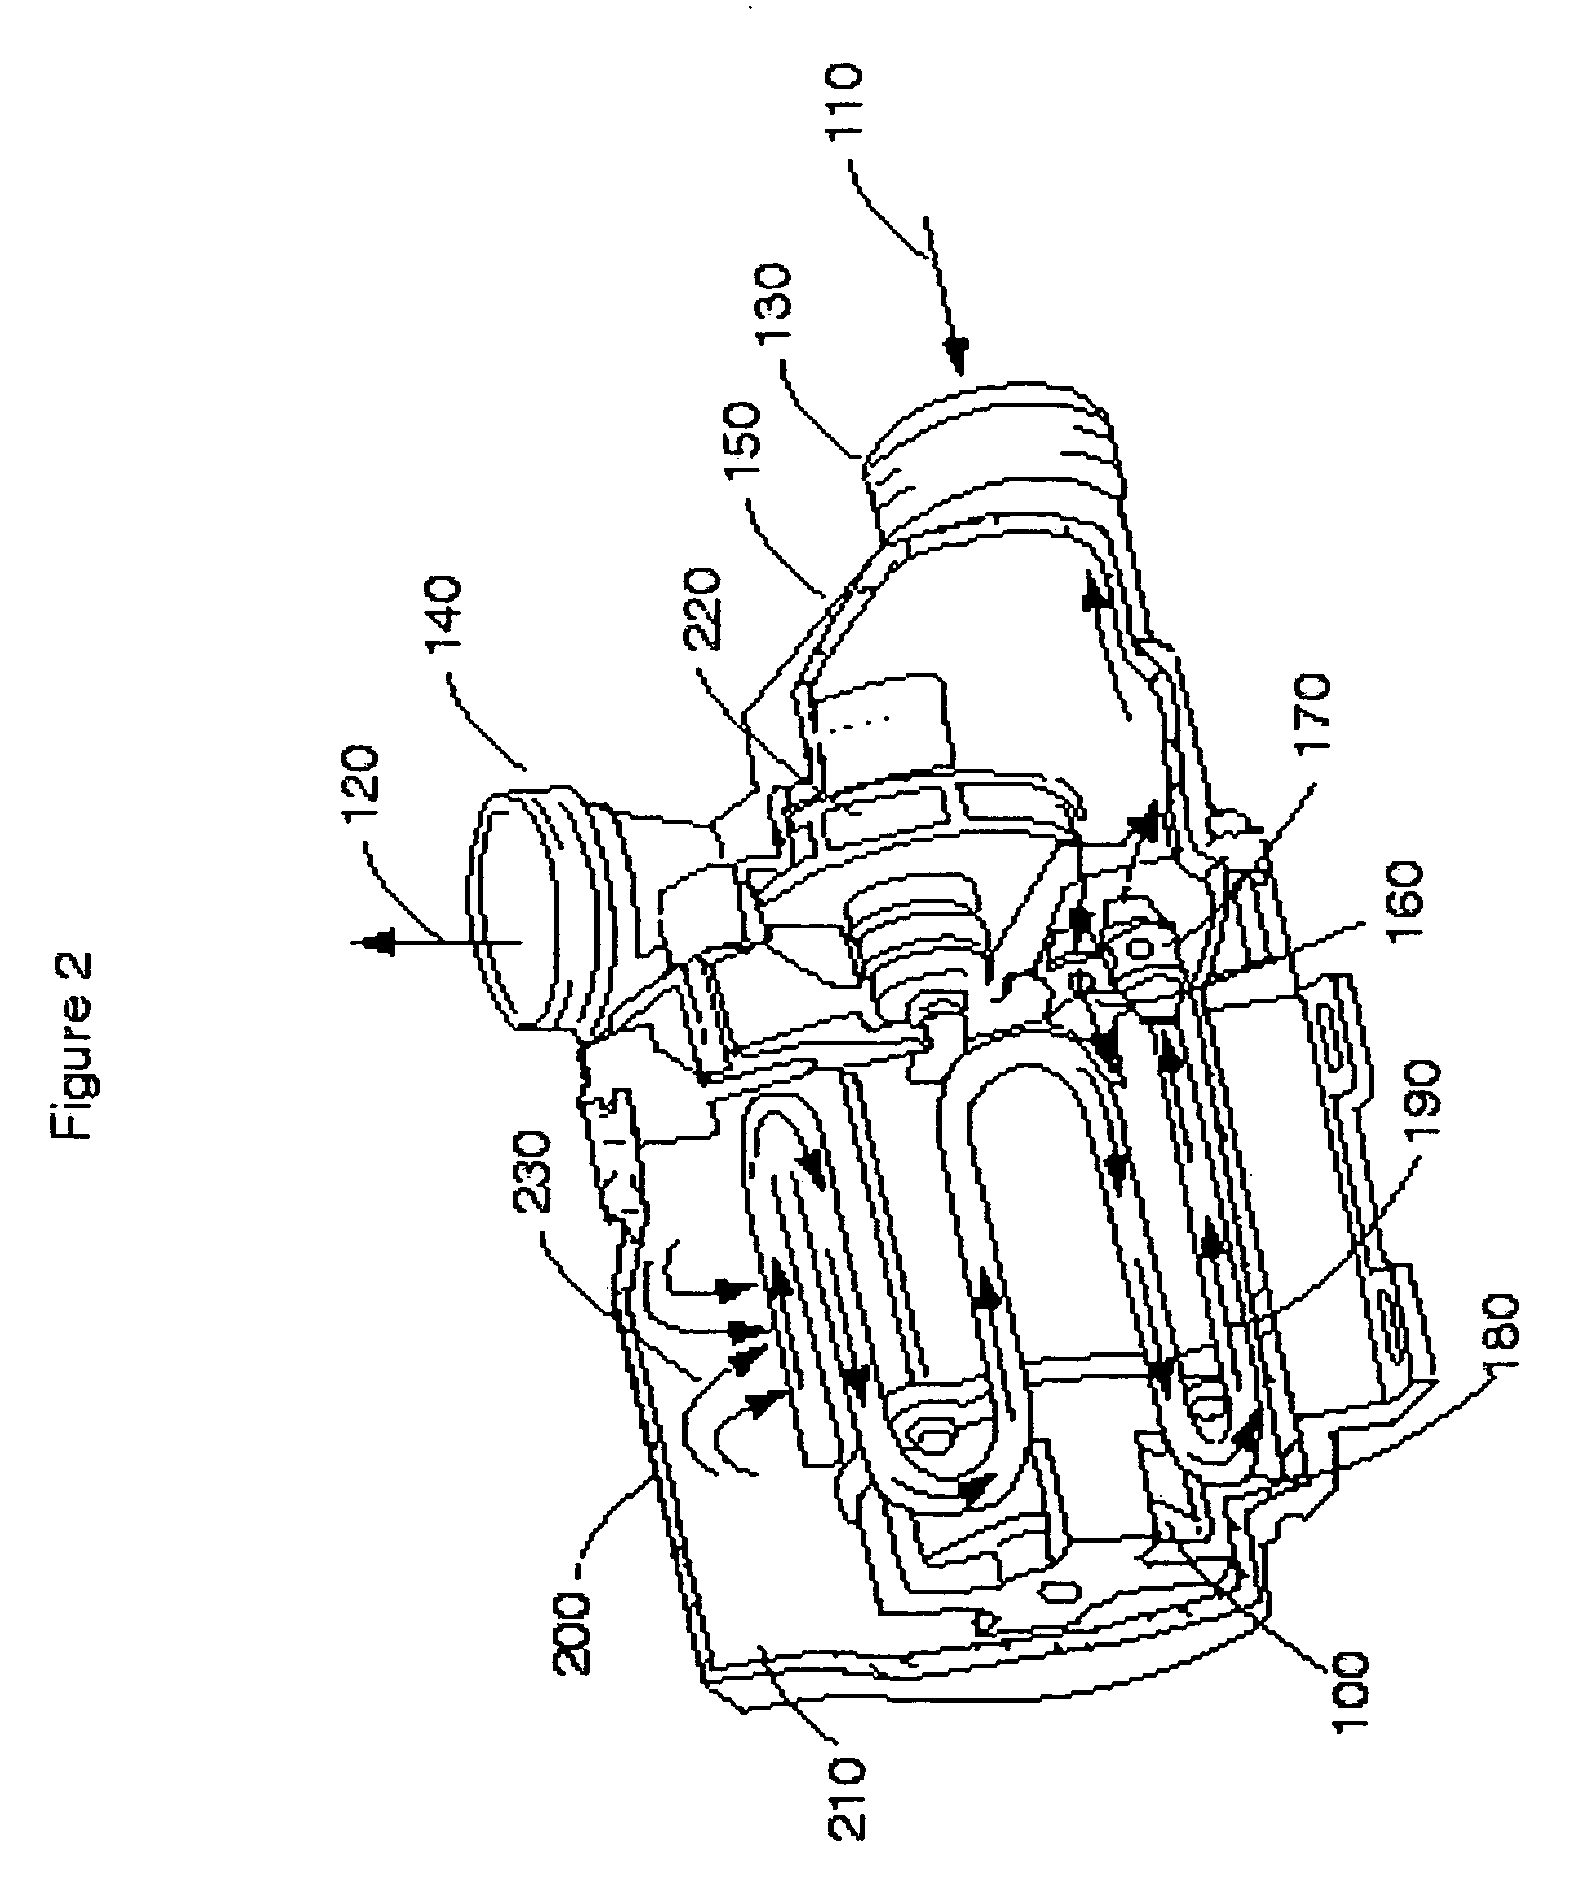 Apparatus for controlling heat generation and recovery in an induction motor